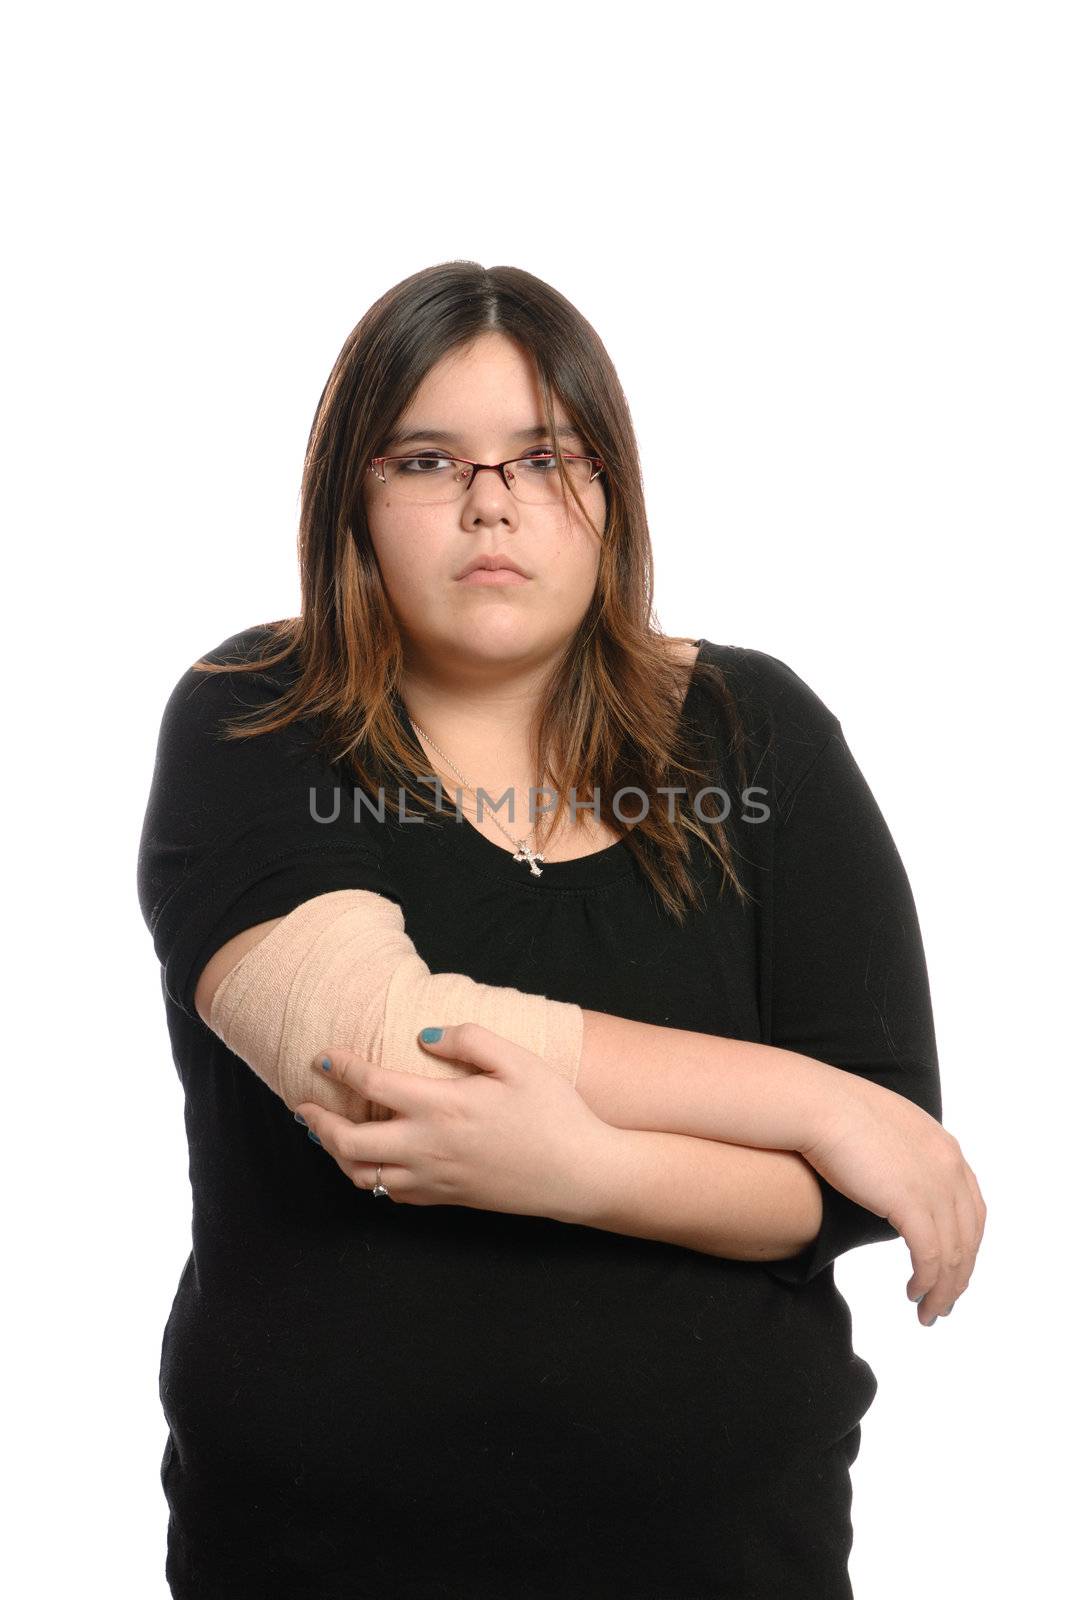 A teenage girl holding her injured elbow with no expression on her face, isolated against a white background.